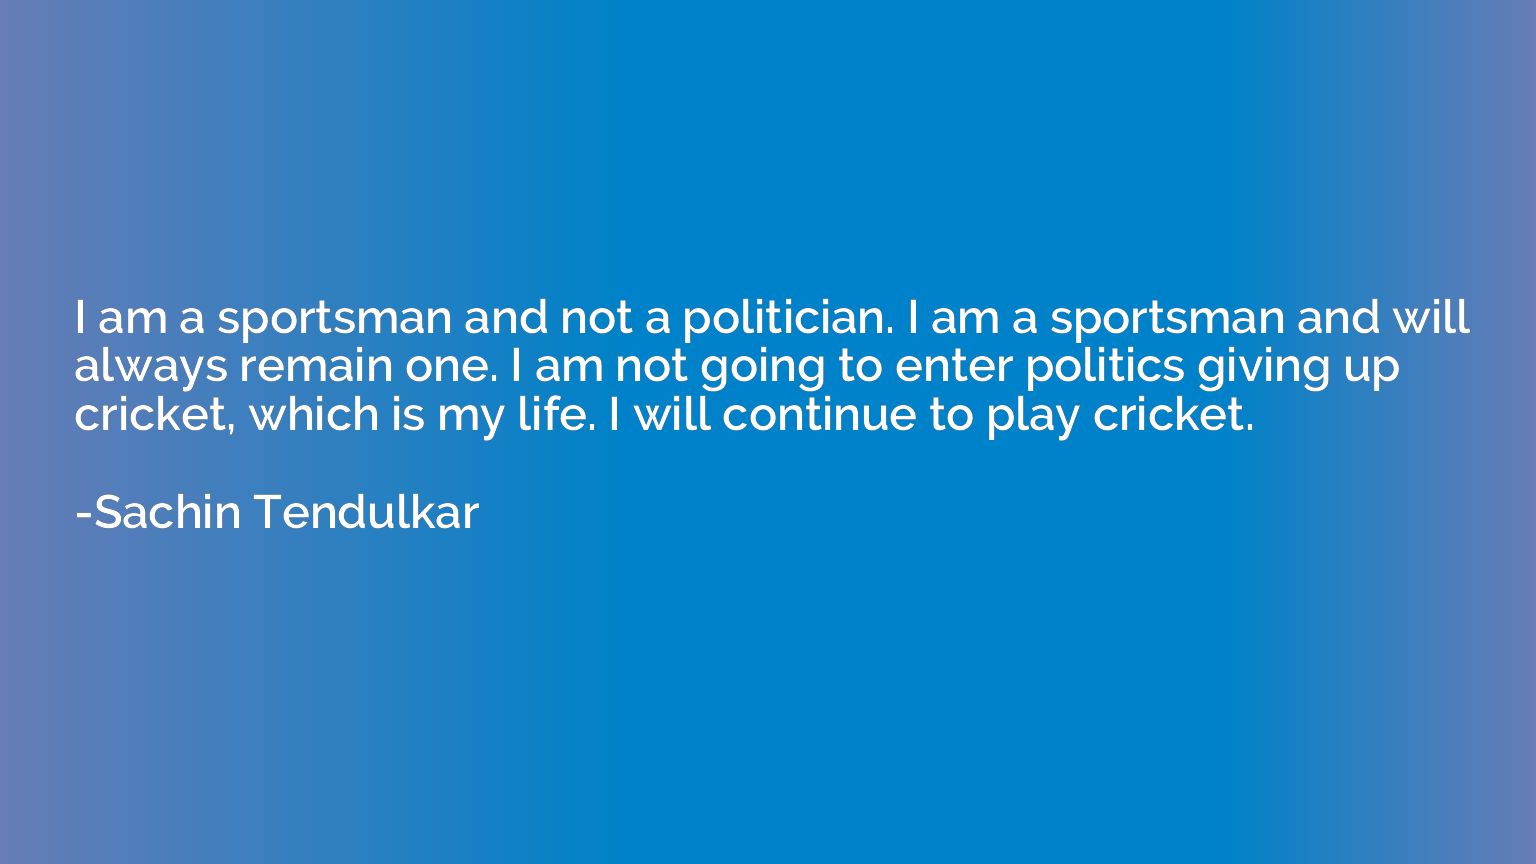 I am a sportsman and not a politician. I am a sportsman and 